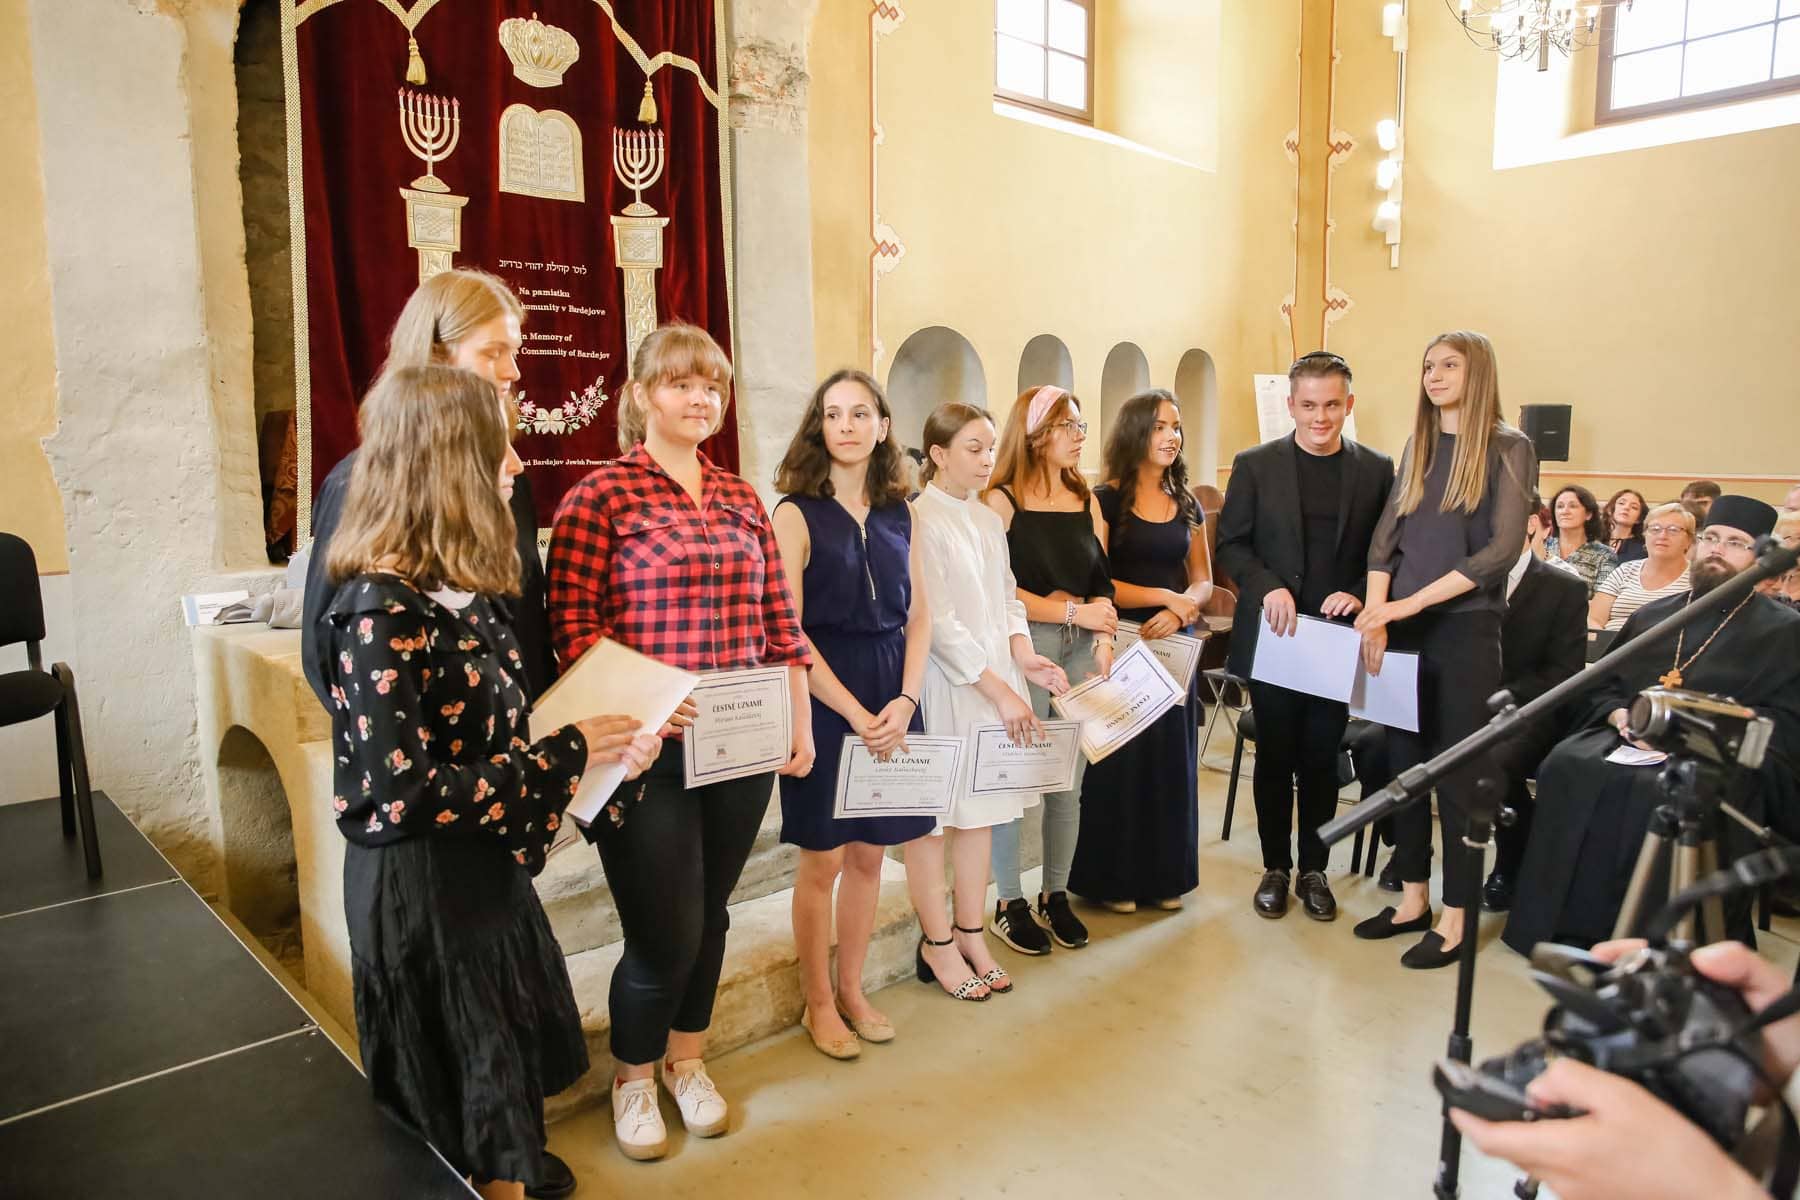 Participants of the Art Contest stand on stage with their certificates